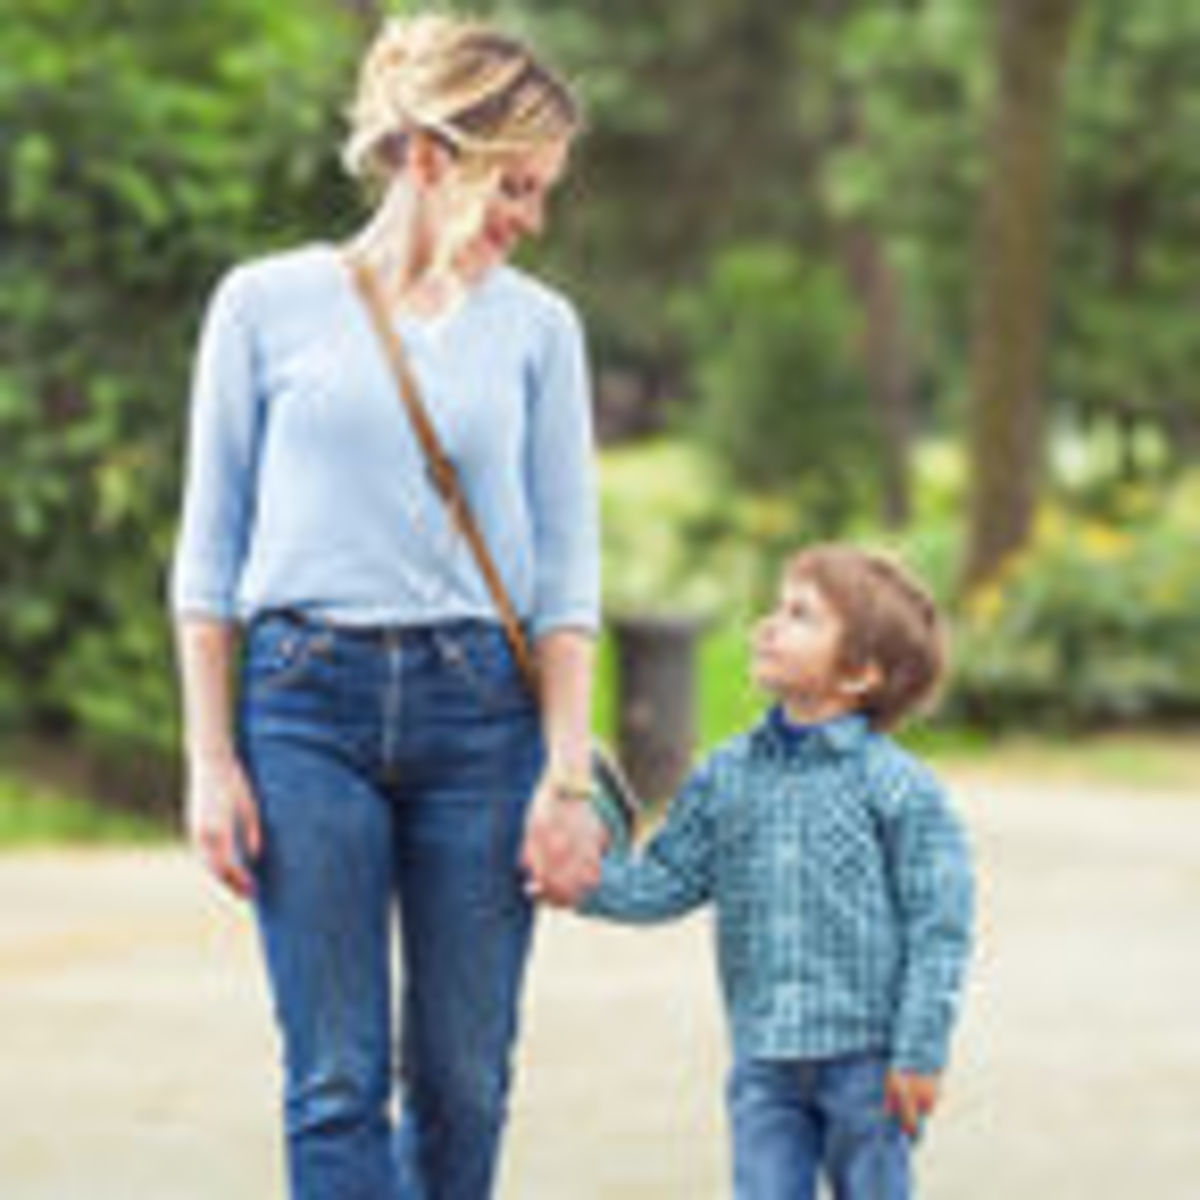 Mom Change The Dress Son Forcing Sex - Mommy Nearest | Psychology Today